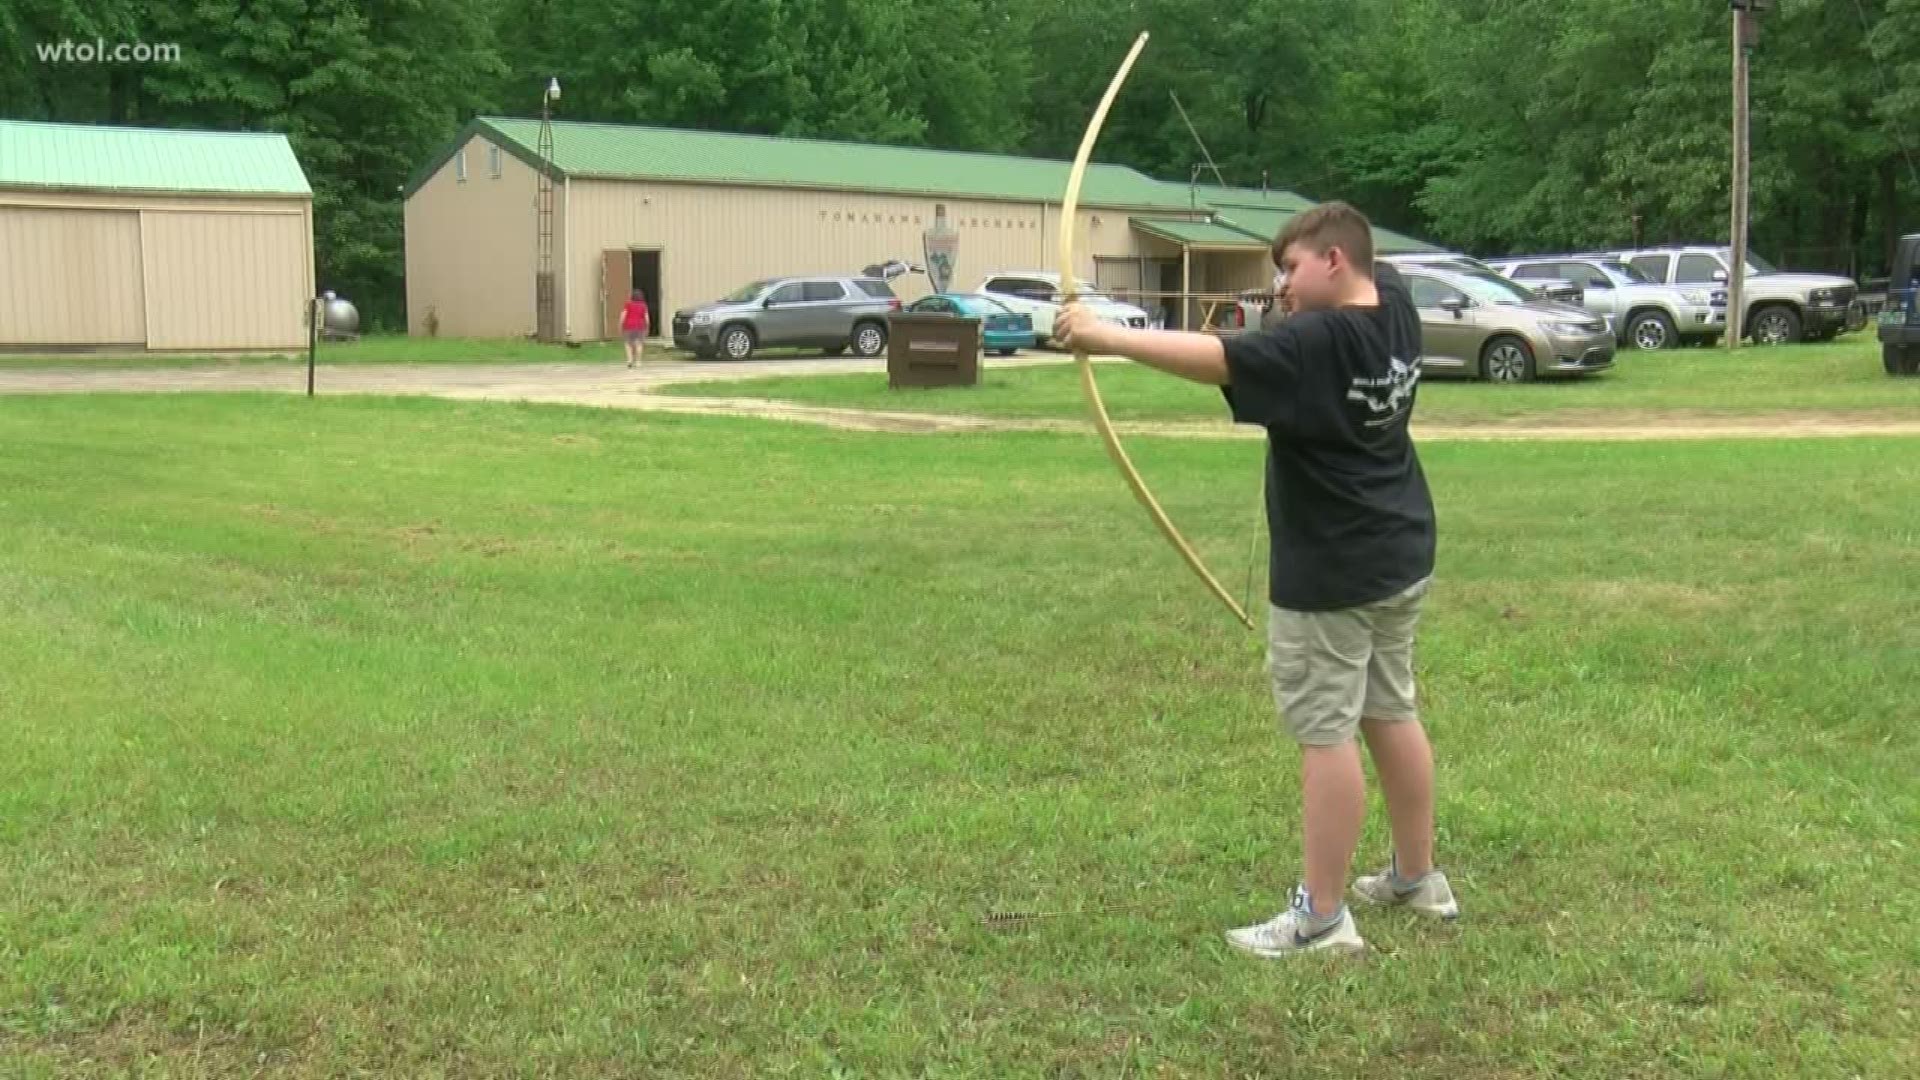 Over 100 archers brought their bows and arrows to Tomahawk Archers Sunday to slay dragons over a target course. The motto: impacting the world one arrow at a time.